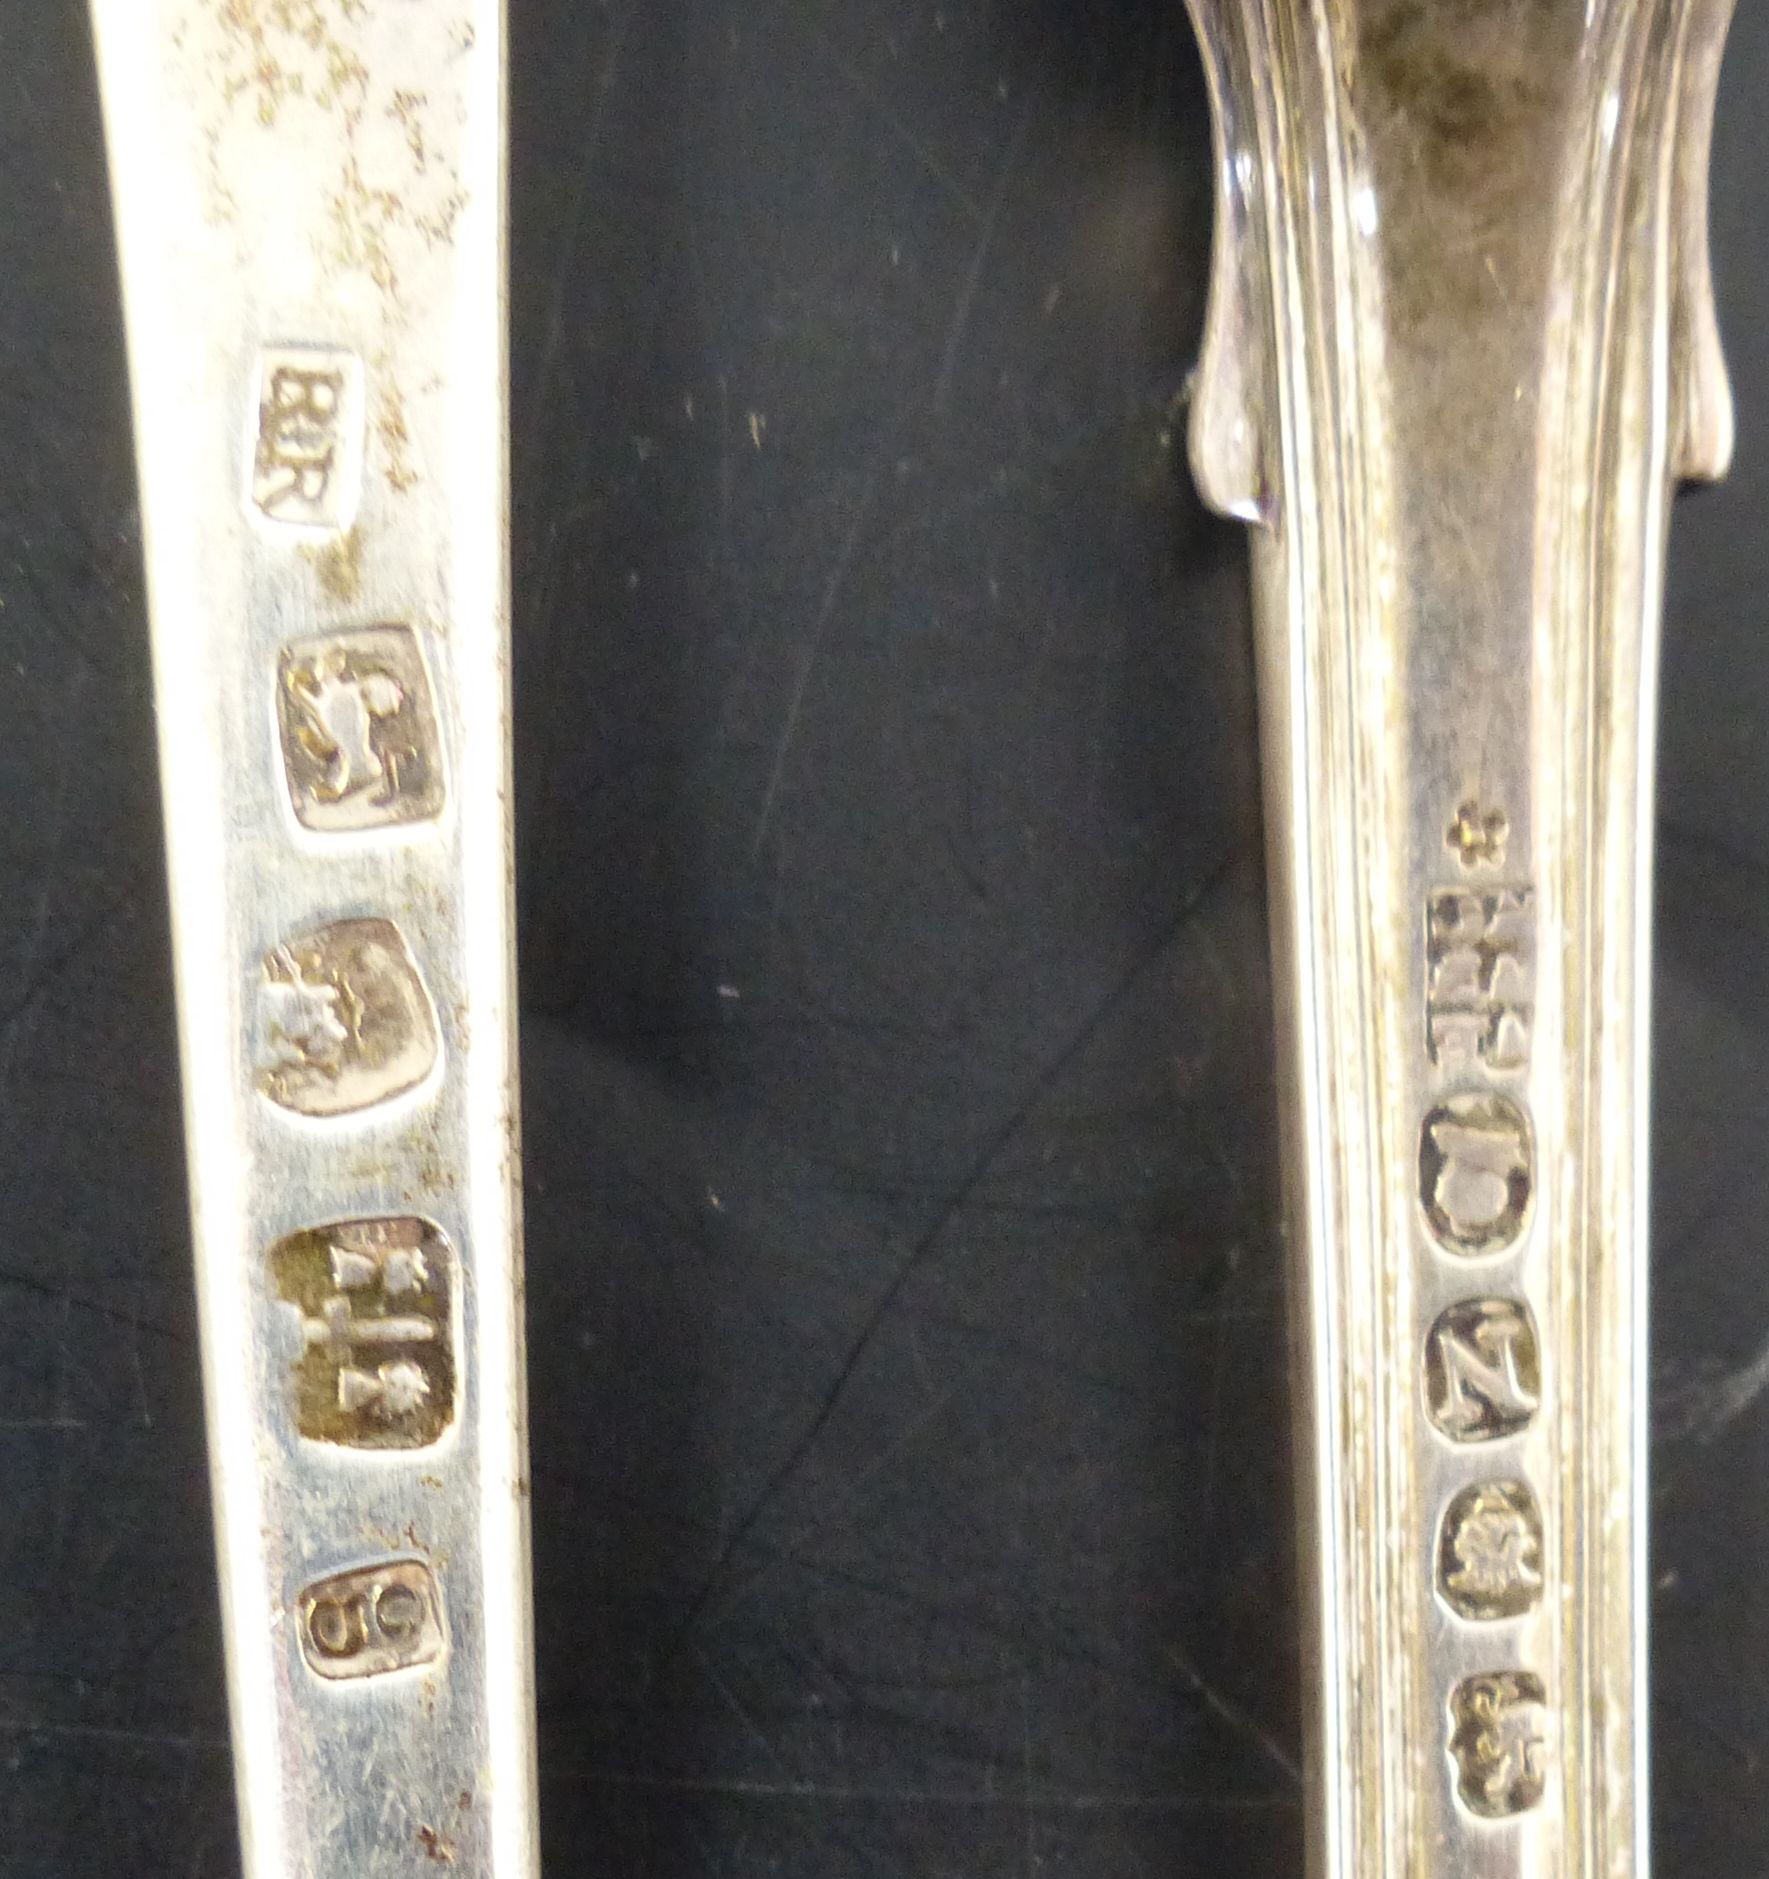 Two 19th century silver marrow scoops, thread pattern by Eley, Fearn & Chawner, London, 1808 and - Image 4 of 7